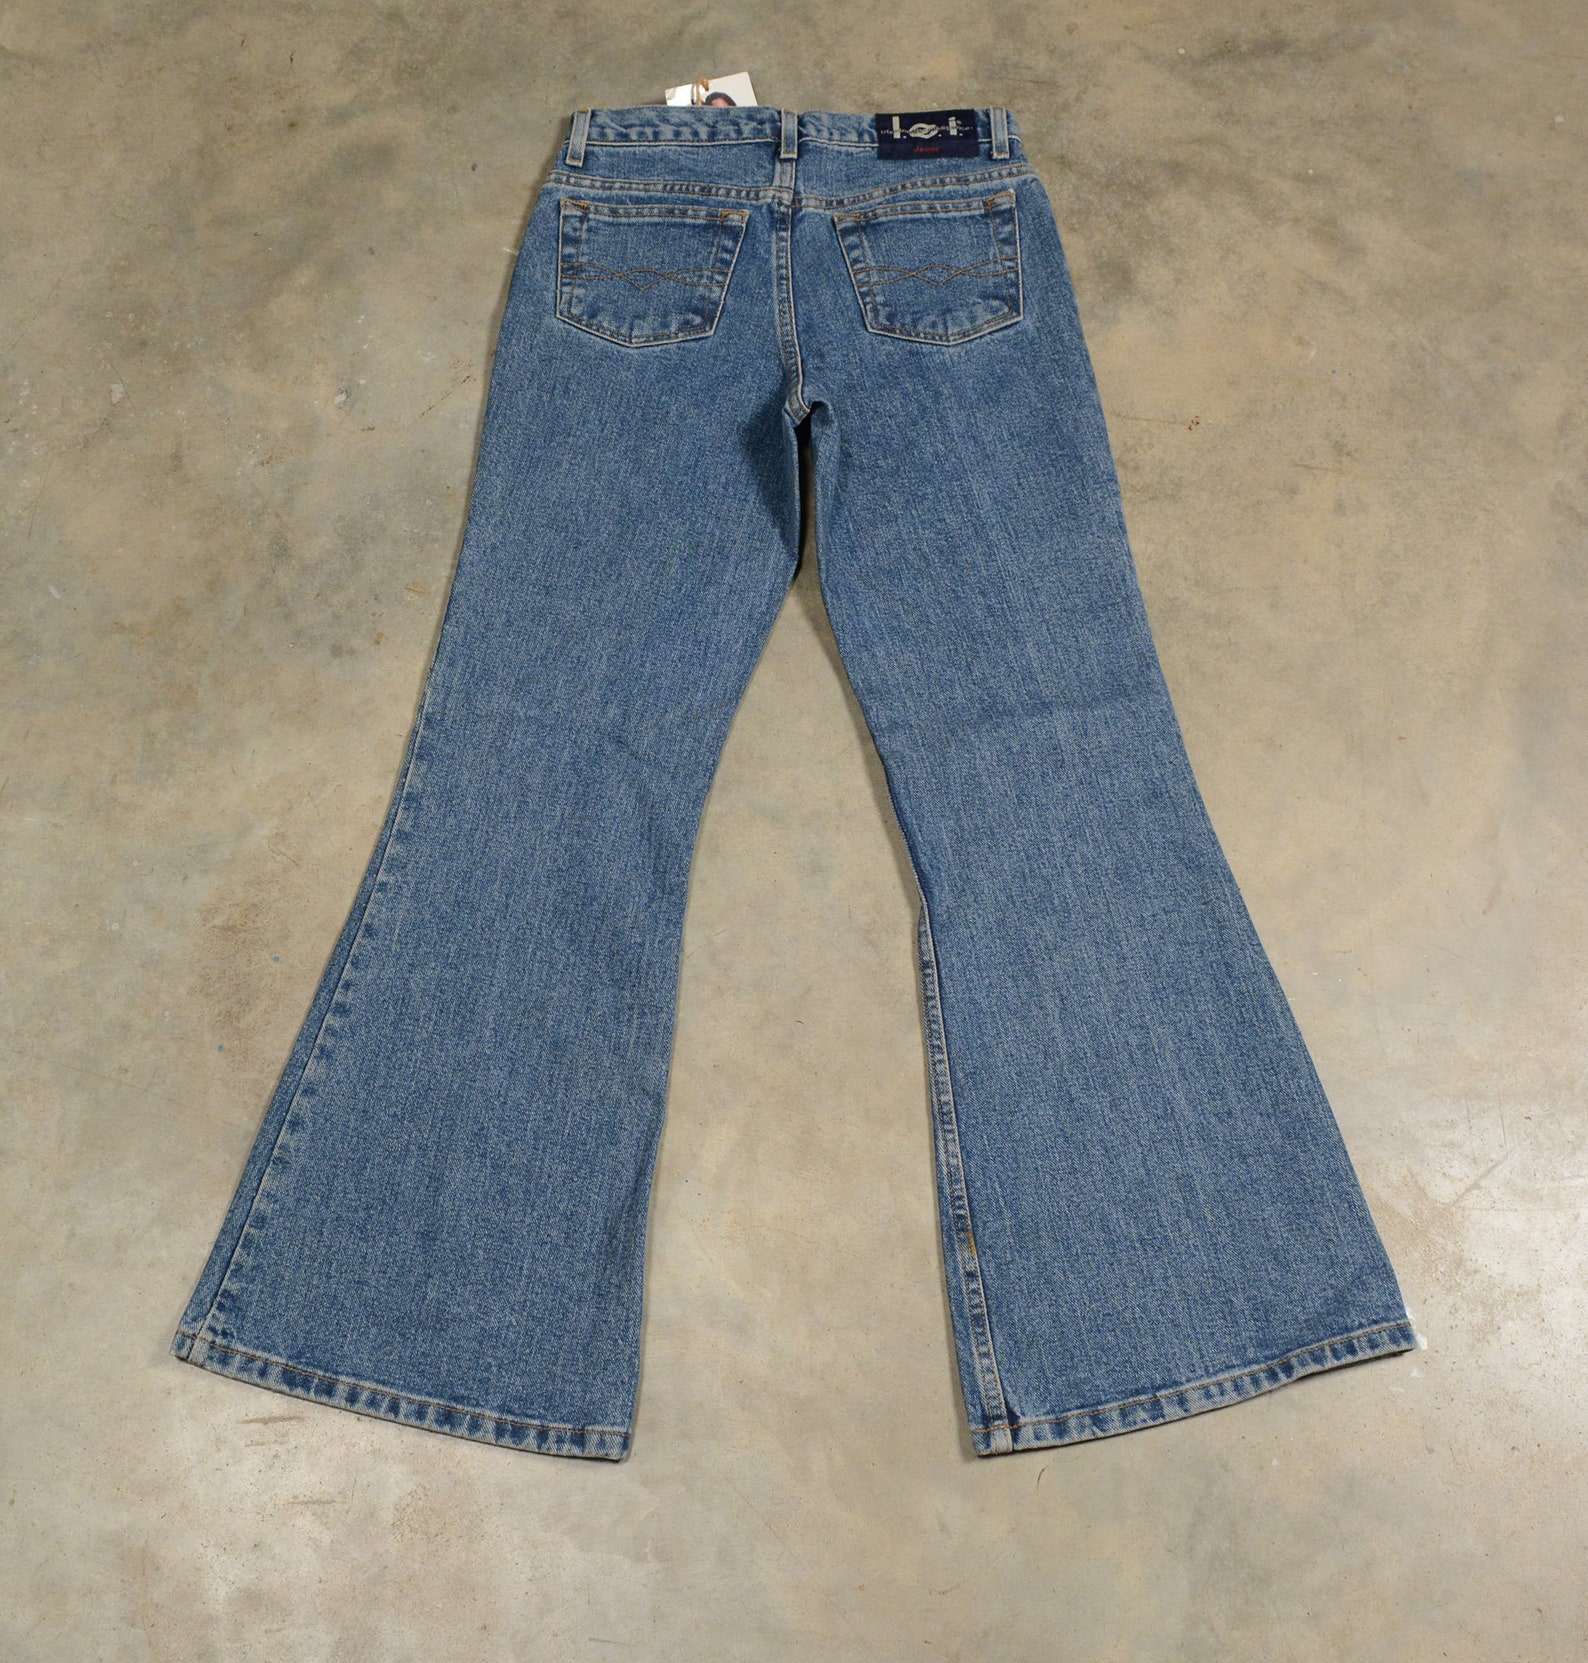 Vintage 90s Low Rise Flare LEI Bellbottom Jeans Hippie Boho - Etsy